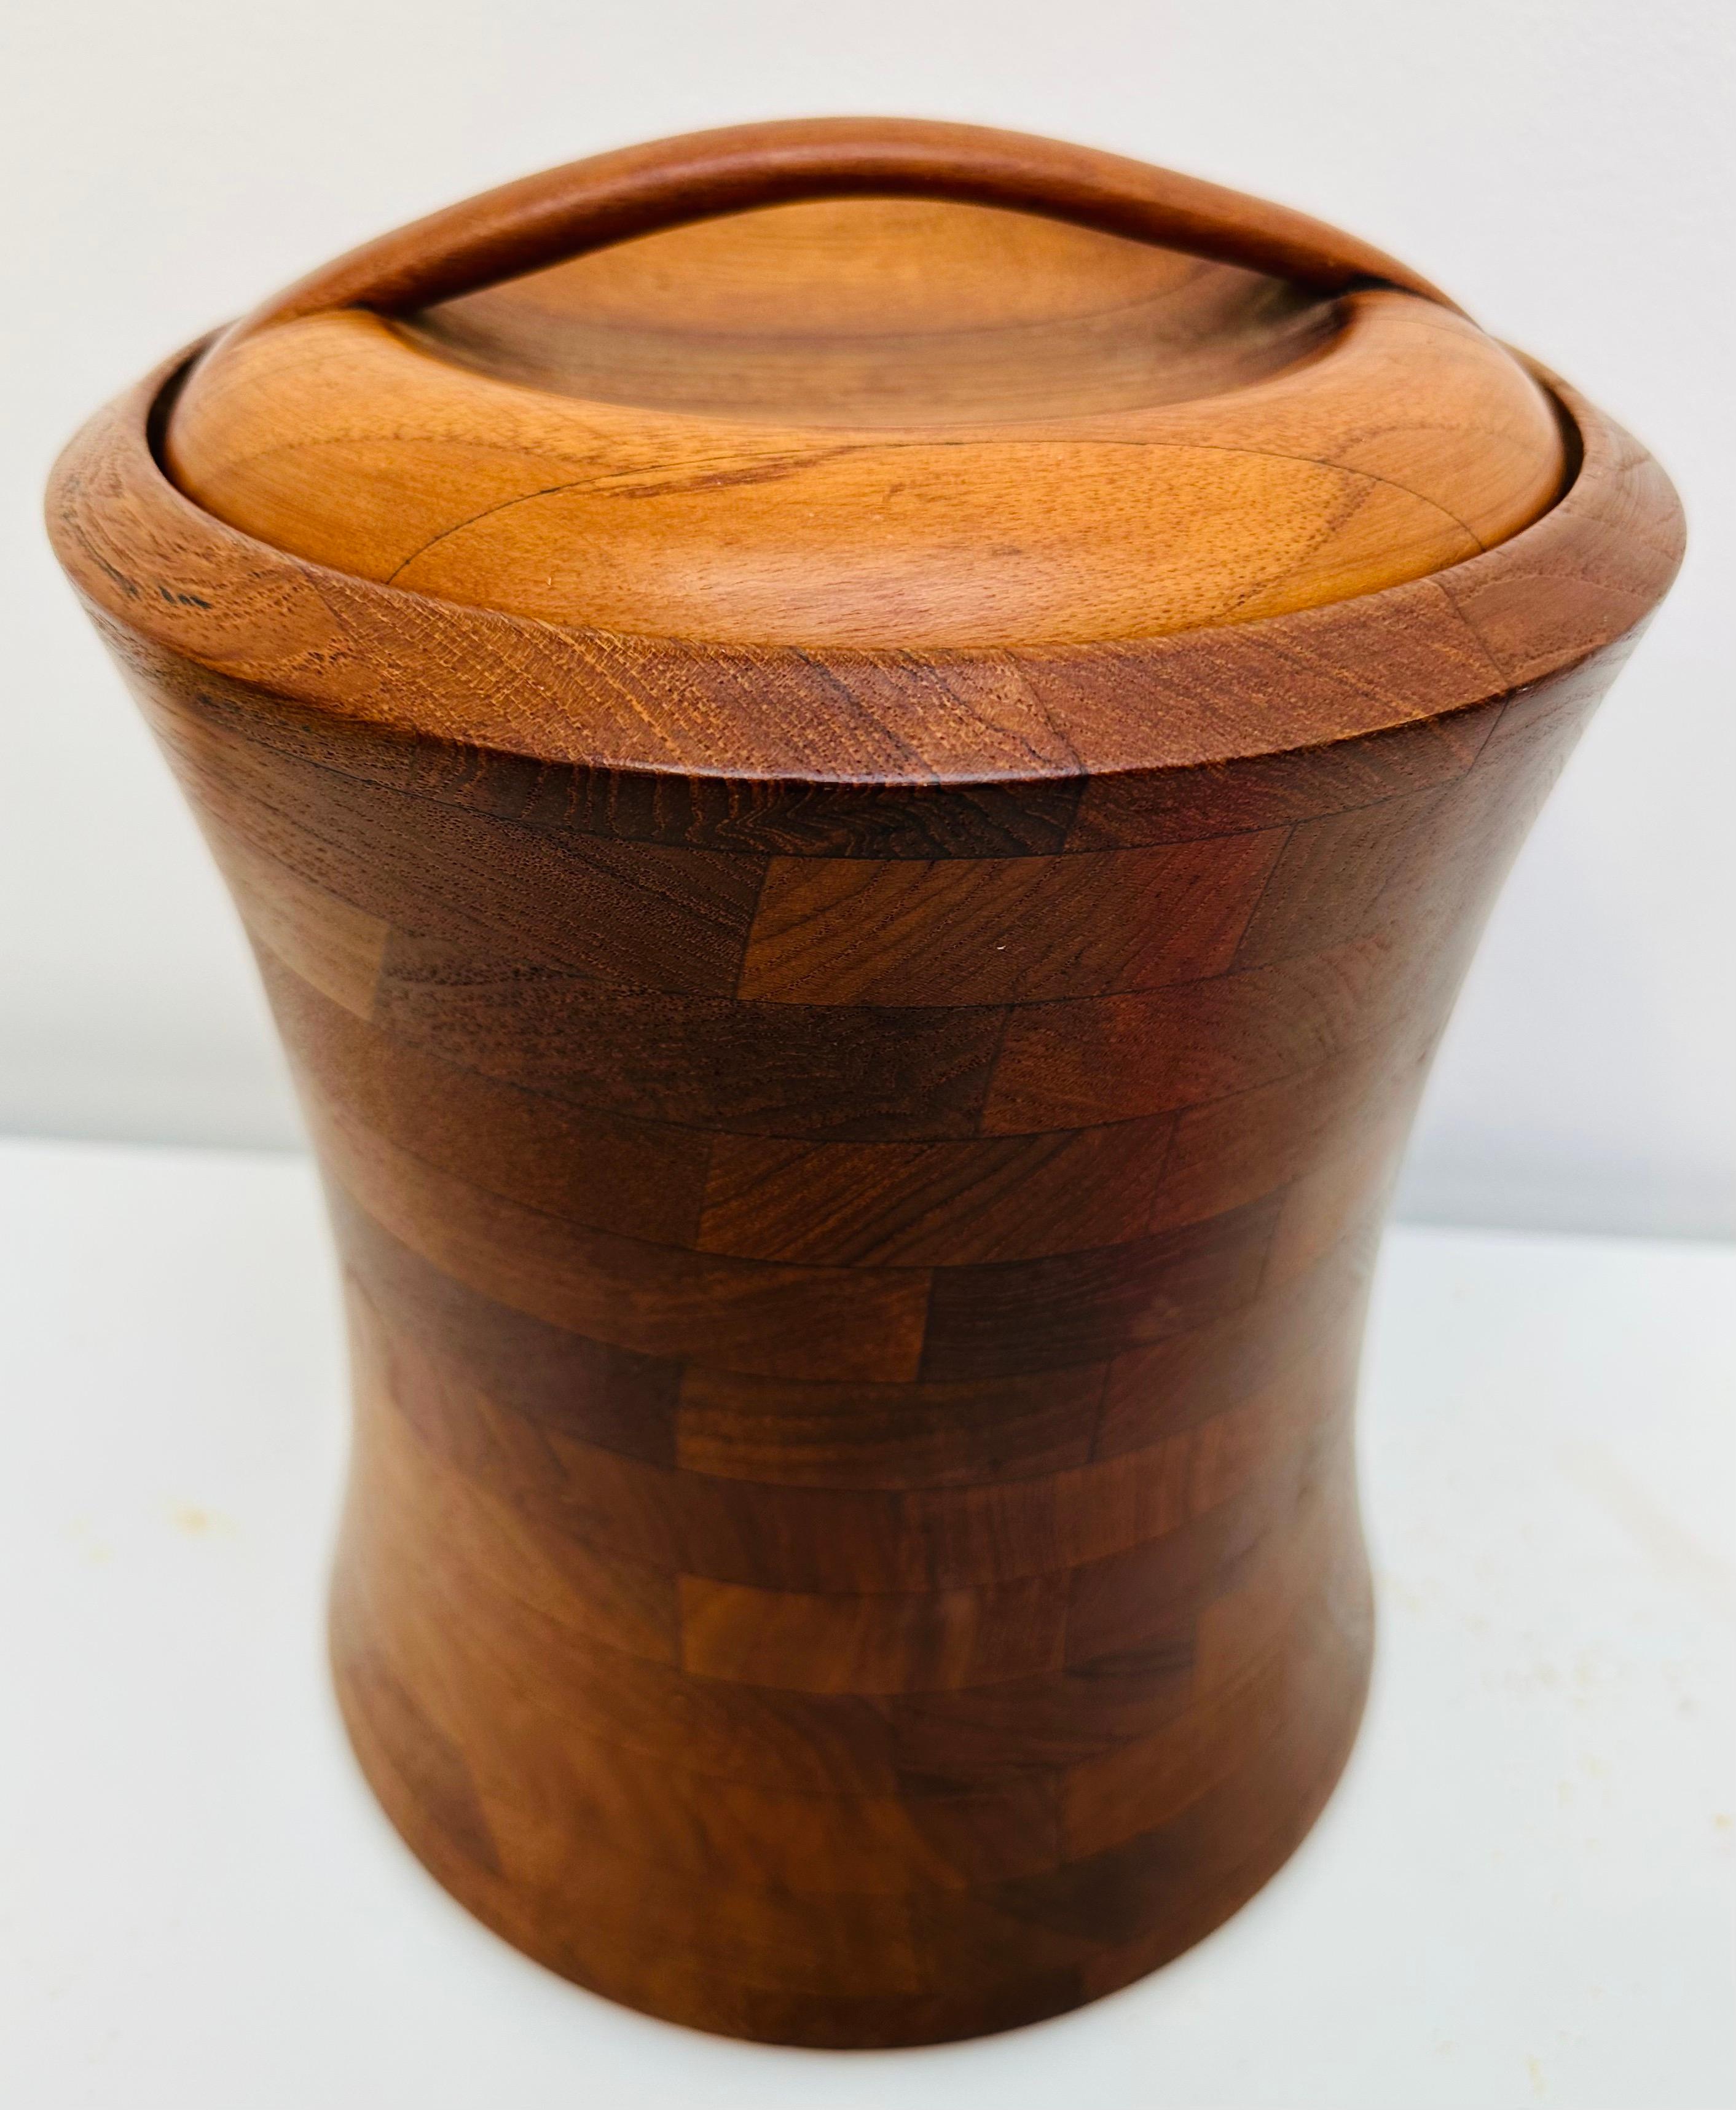 1960s Danish design large Teak ice bucket or wine cooler. The ice bucket is an elegant convex-shape, reminiscent of a power plant cooling tower, well-made and constructed. Its large size allows it to be fully functional and not just for show holding